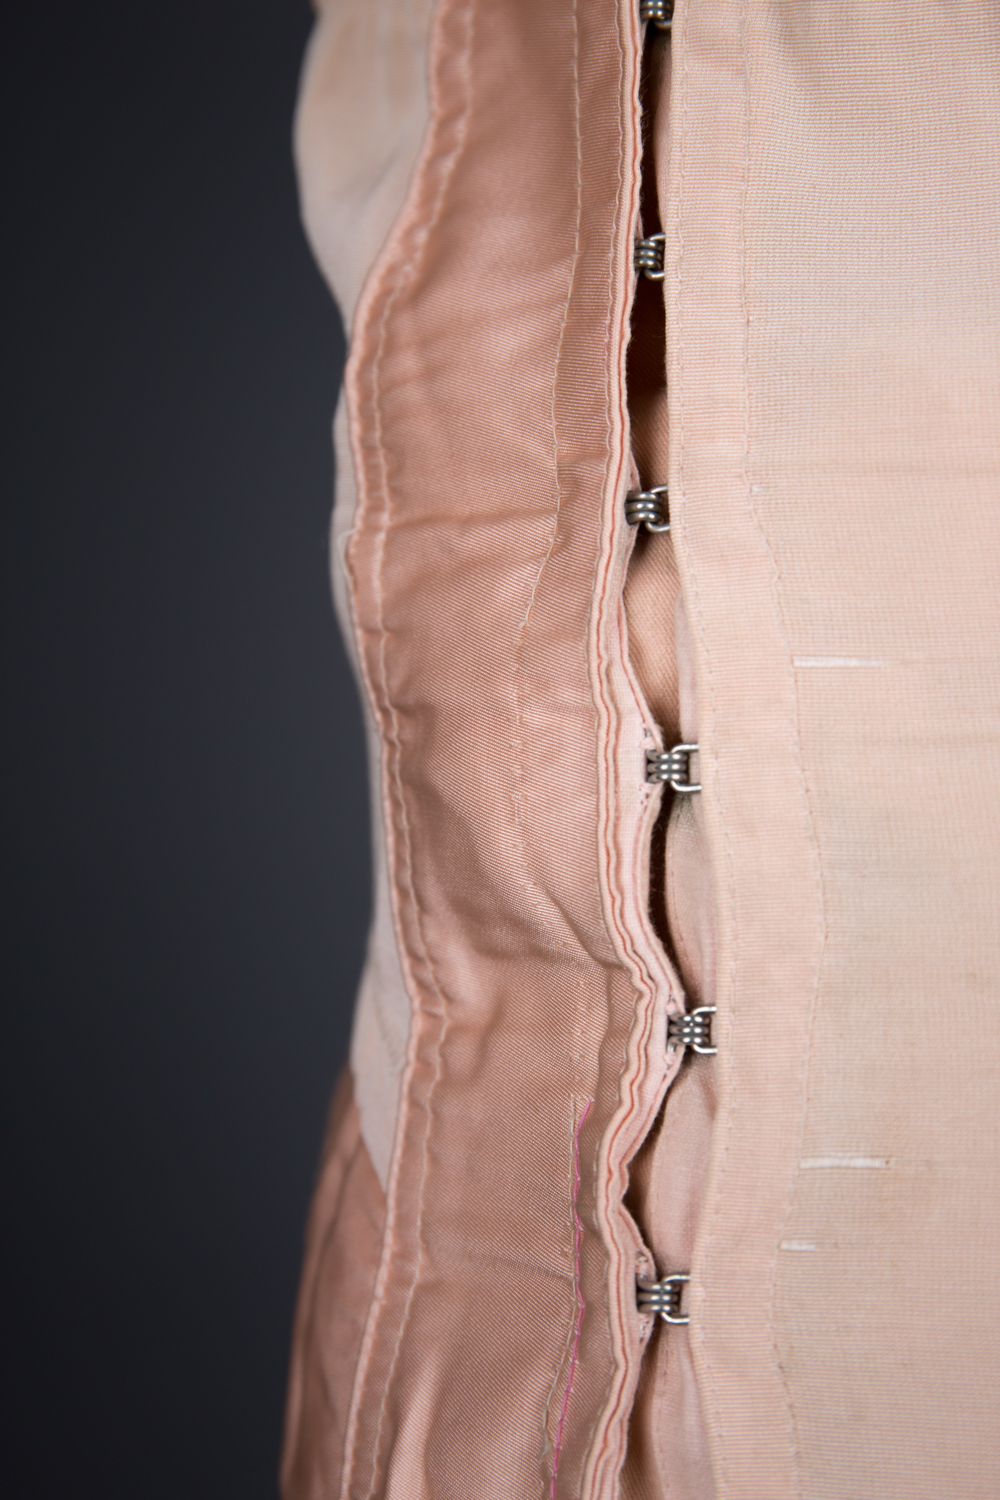 'Nu-Back' Girdle By Liberty, c. 1950s, Great Britain. The Underpinnings Museum. Photography by Tigz Rice.